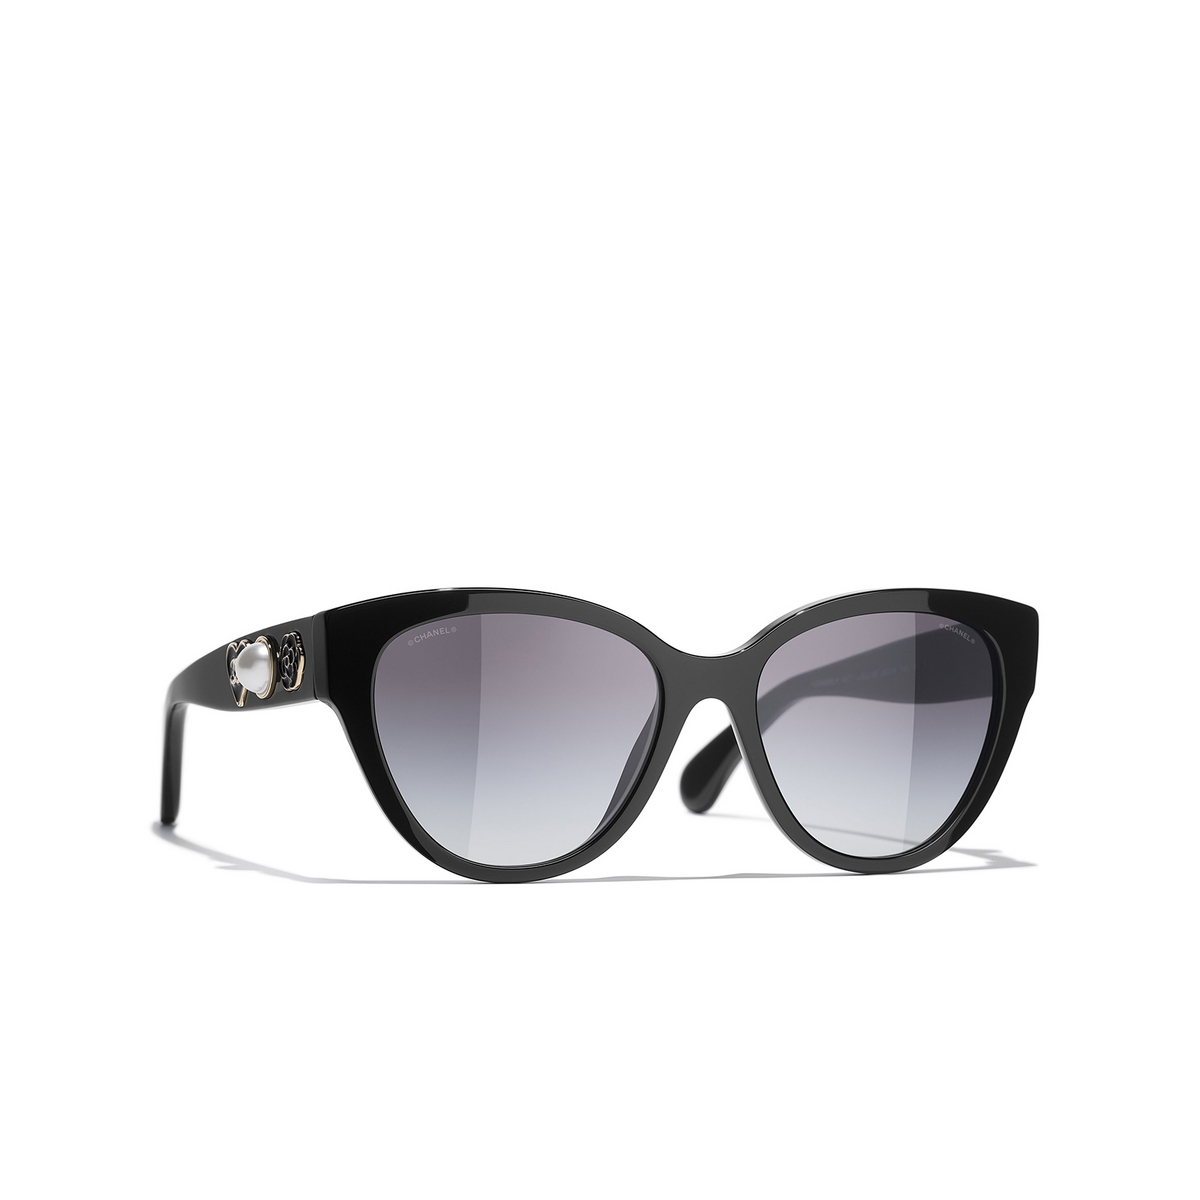 CHANEL butterfly Sunglasses C622S6 Black - three-quarters view